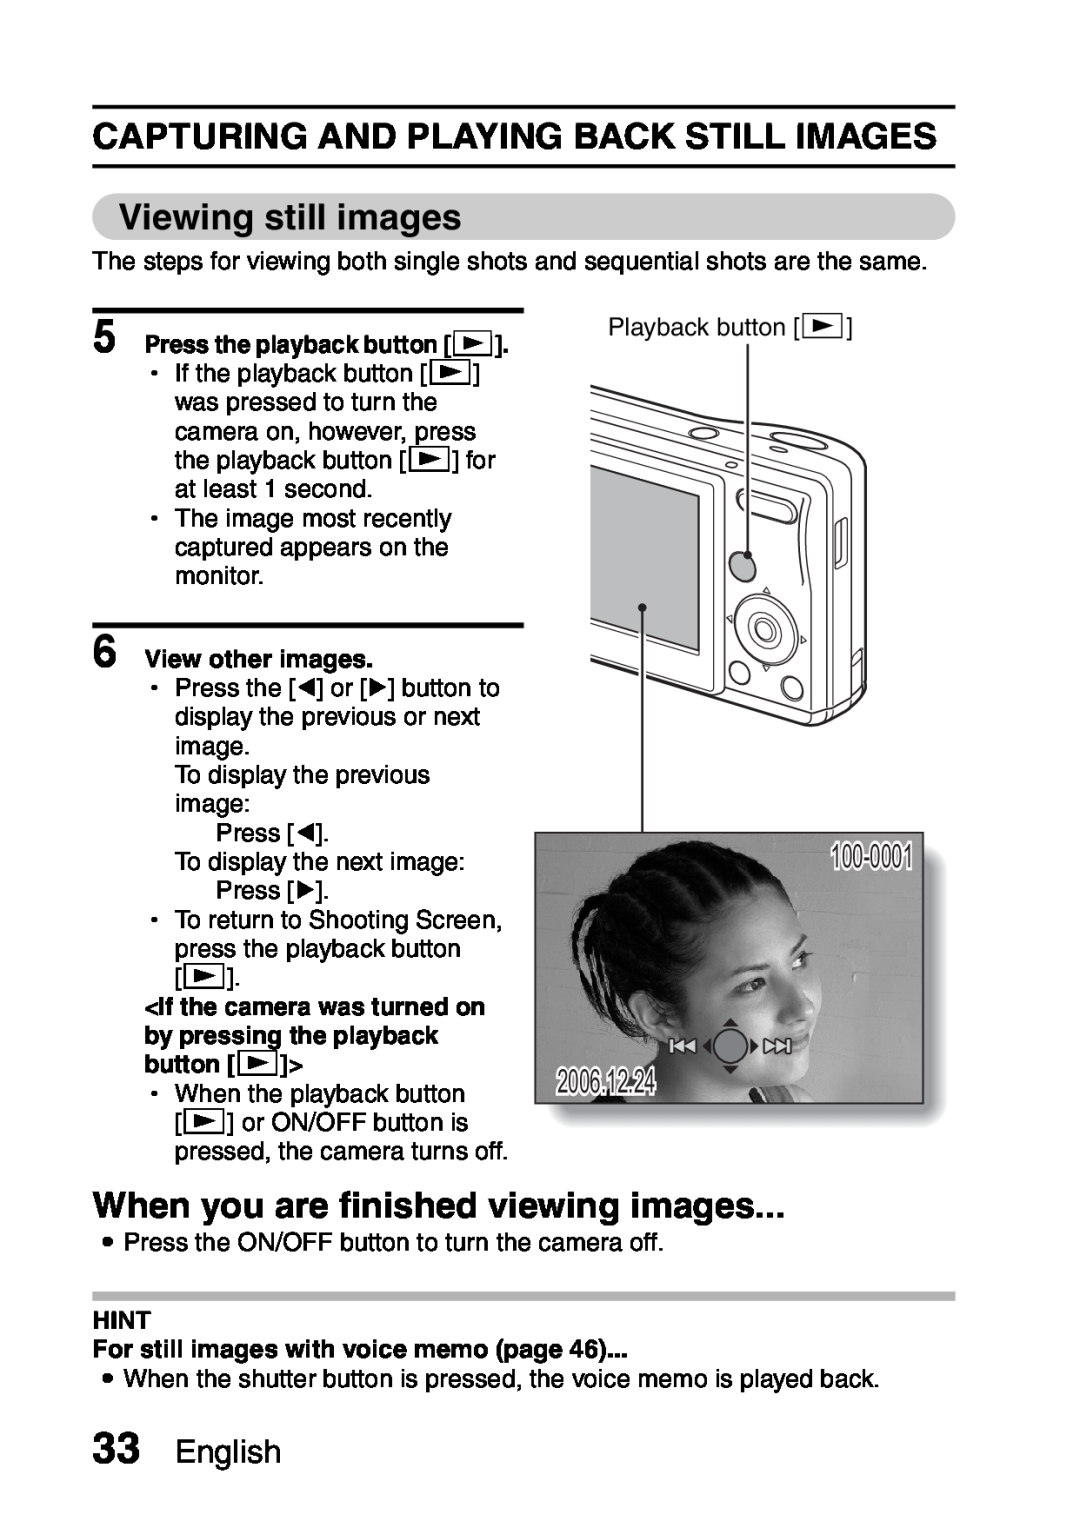 Sanyo VPC-S60 CAPTURING AND PLAYING BACK STILL IMAGES Viewing still images, When you are finished viewing images, English 